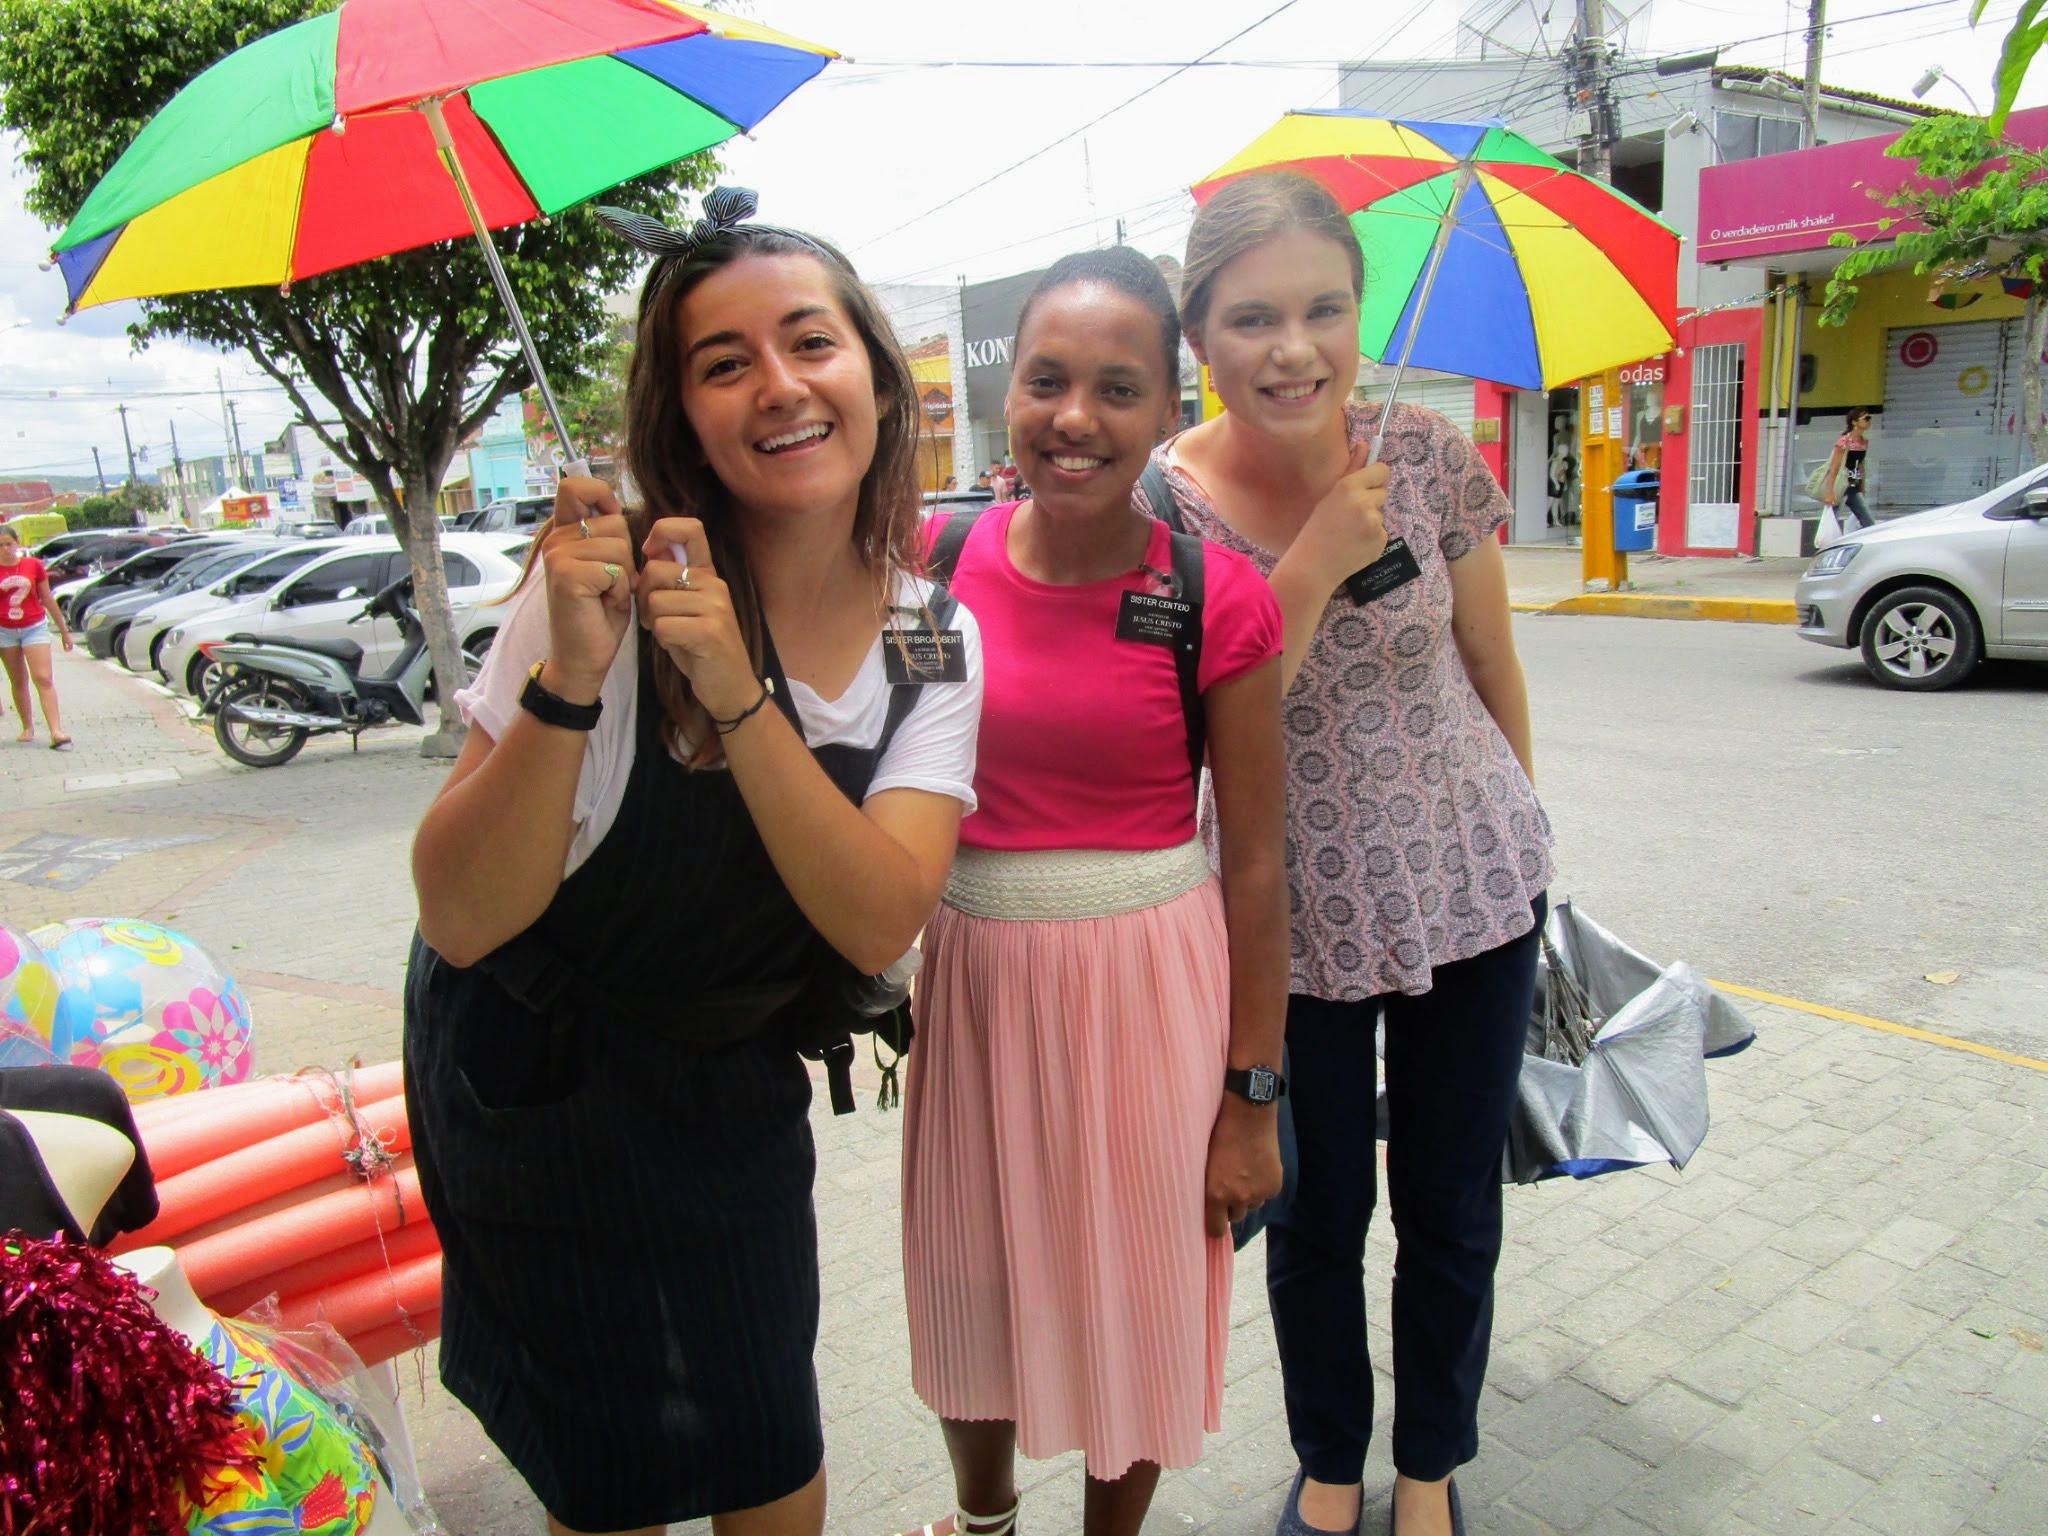 Sister Broadbent, Sister Centeio, and Sister Faulconer, Missionaries for the Church of Jesus Christ of Latter-day Saints holding small frevo umbrellas in Brazil